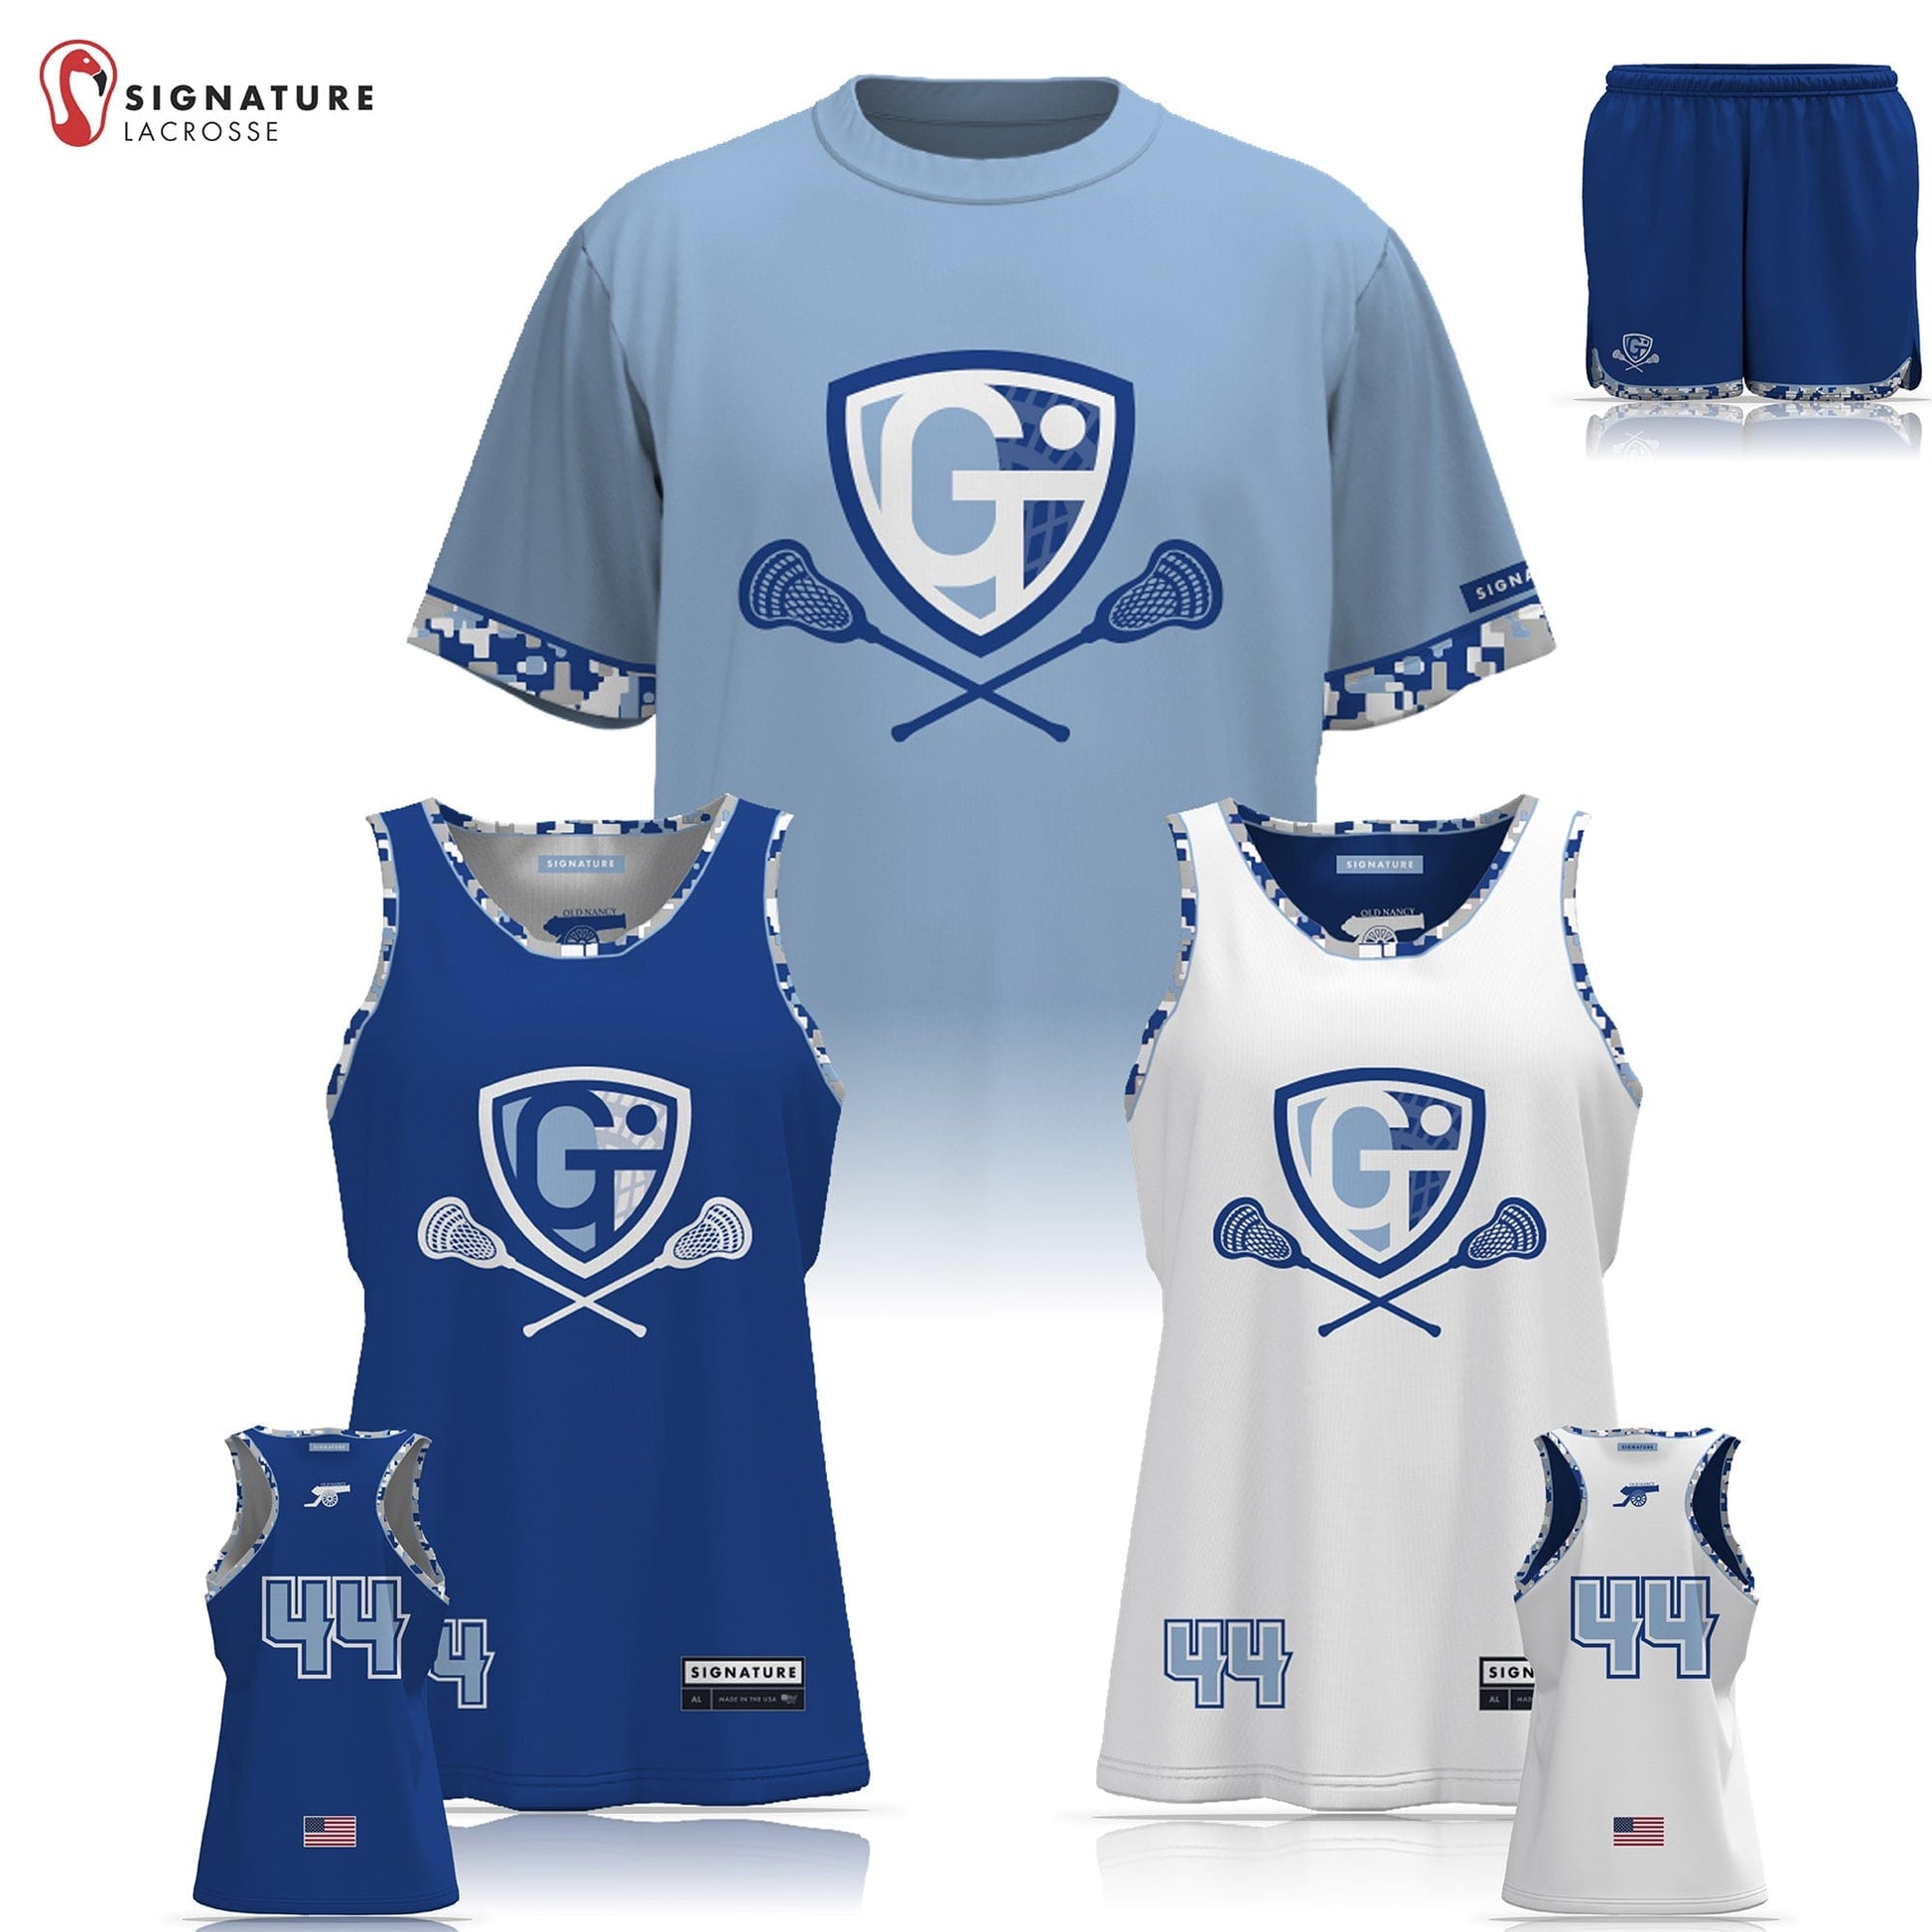 Georgetown-Triton Youth Lacrosse Women's 3 Piece Player Game Package: 1-2 Signature Lacrosse